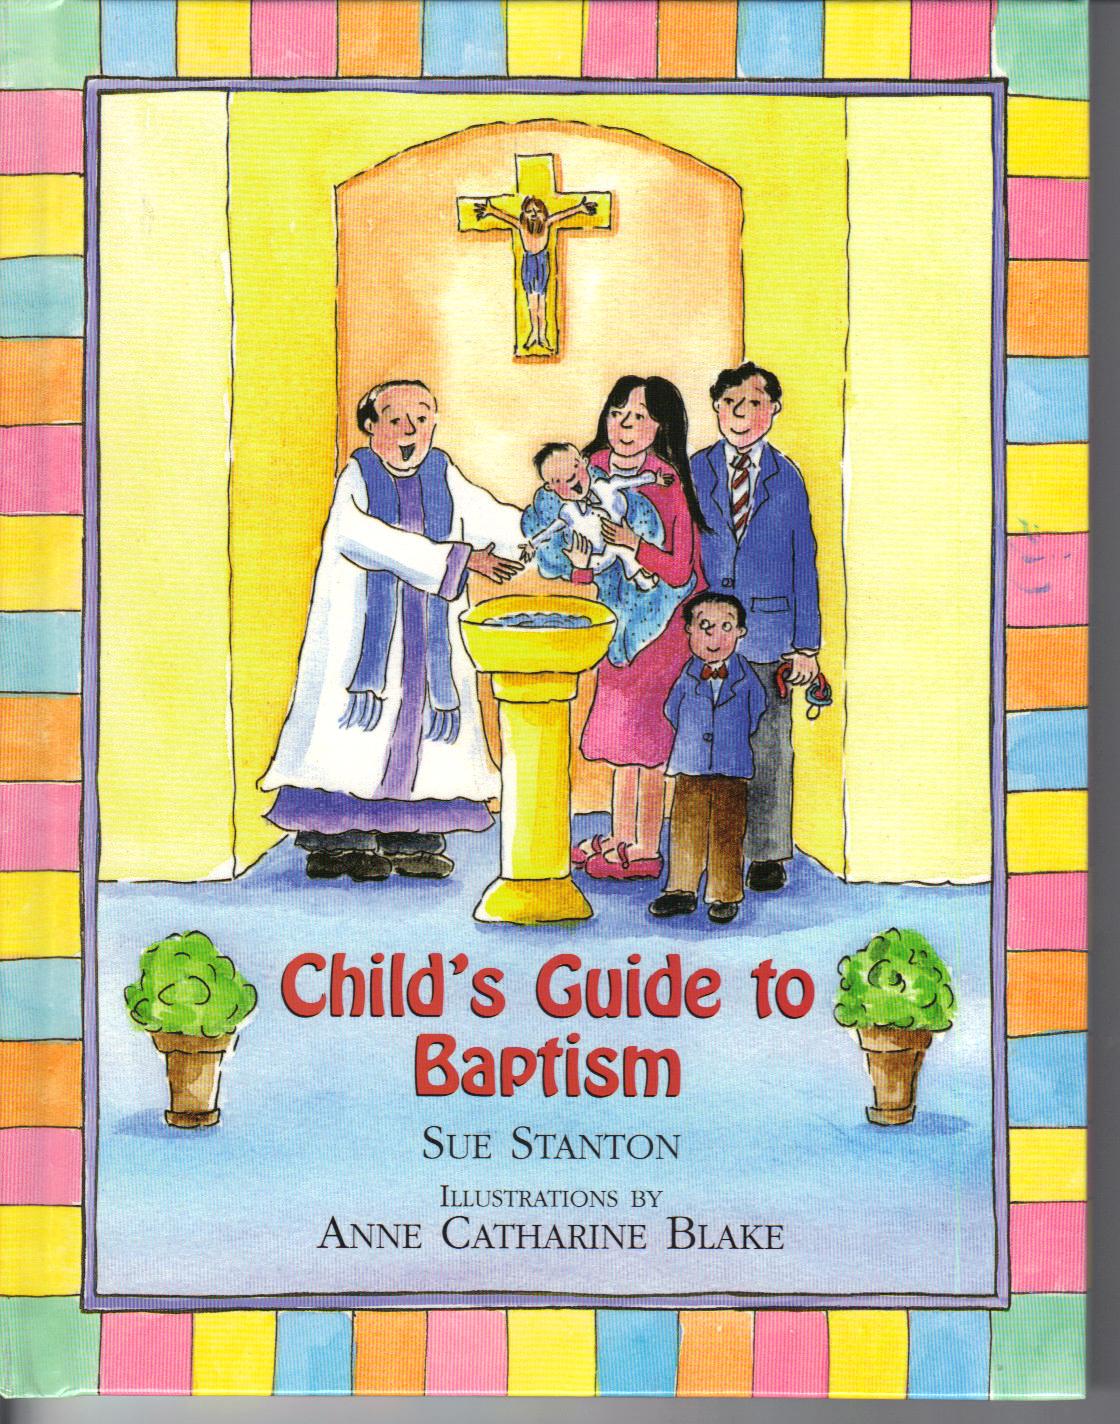 Child's Guide to Baptism by Sue Stanton